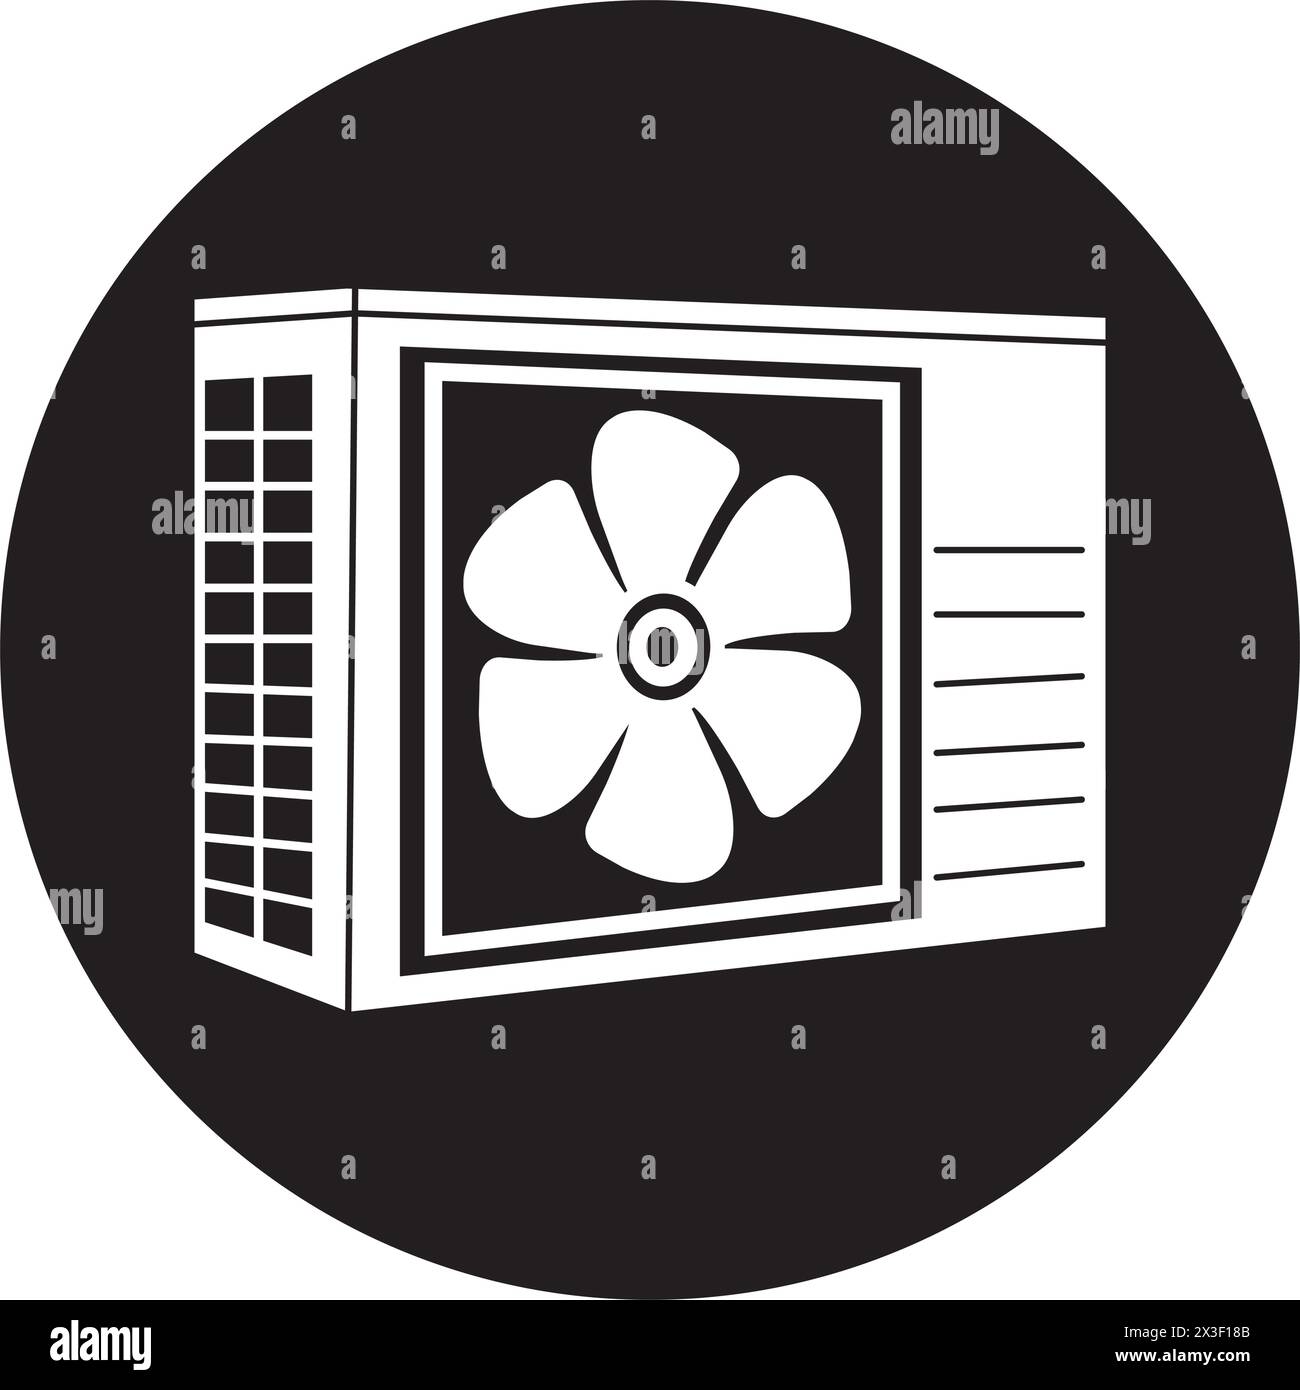 Siimple design outdoor air conditioner icon vector illustration Stock Vector